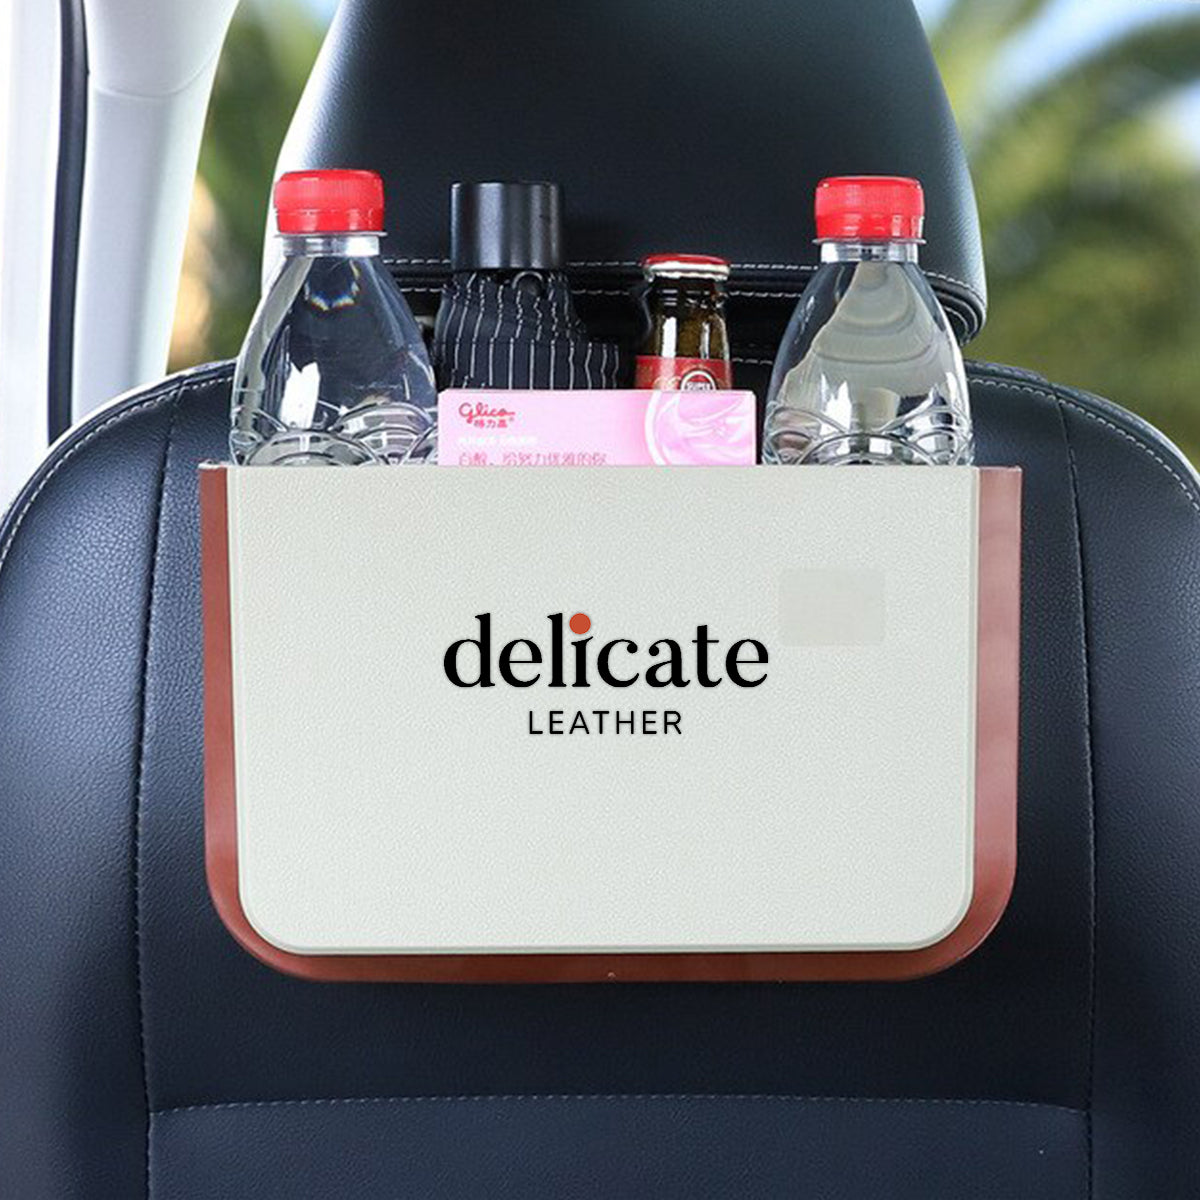 Hanging Waterproof Car Trash can-Foldable, Custom For Your Cars, Waterproof, and Equipped with Cup Holders and Trays. Multi-Purpose, Car Accessories MT11992 - Delicate Leather